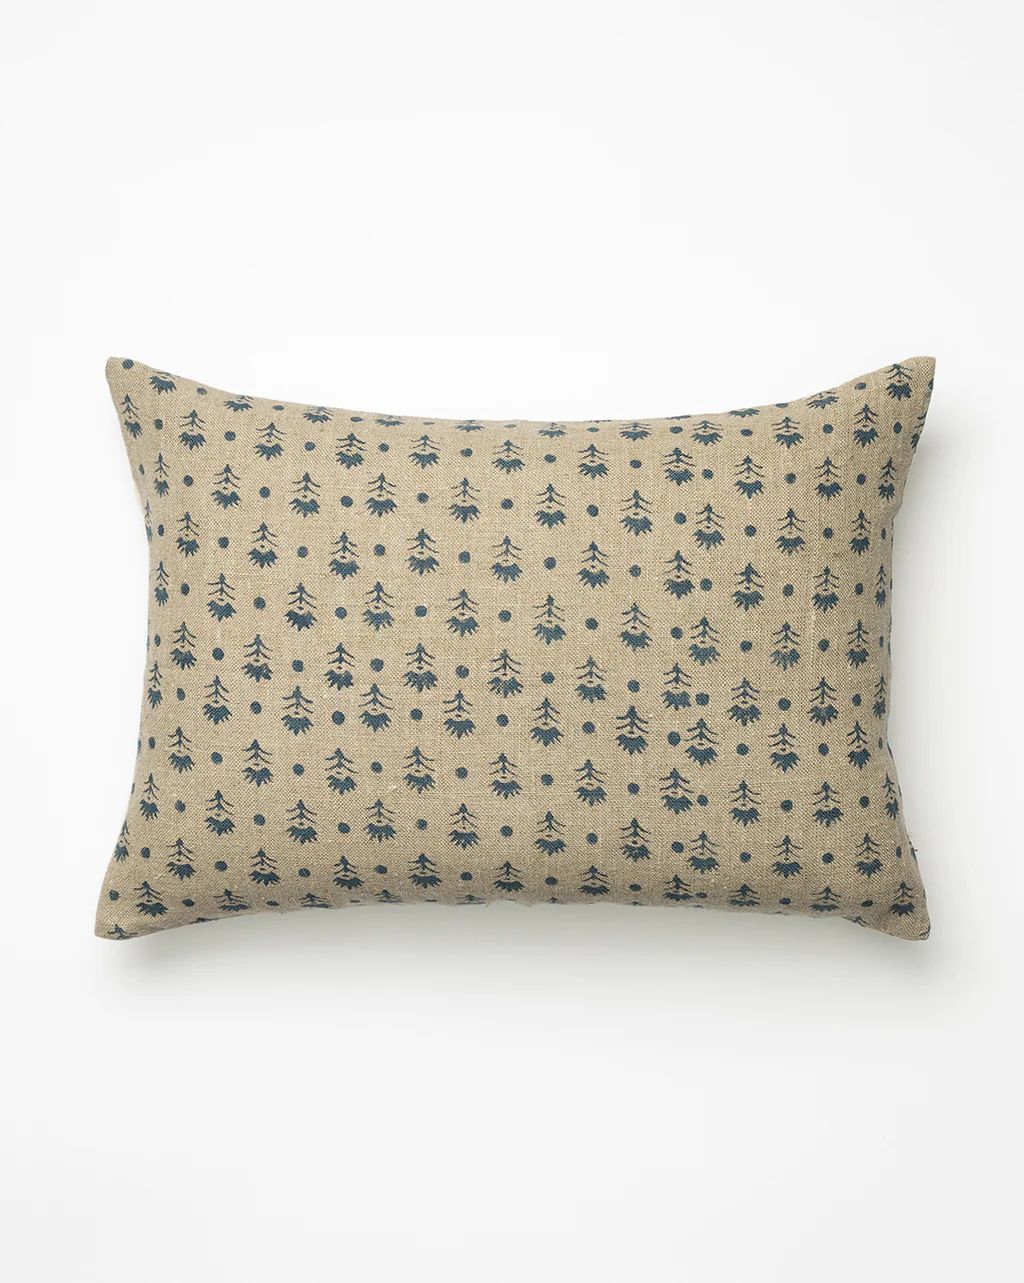 Gwendolyn Pillow Cover | McGee & Co.